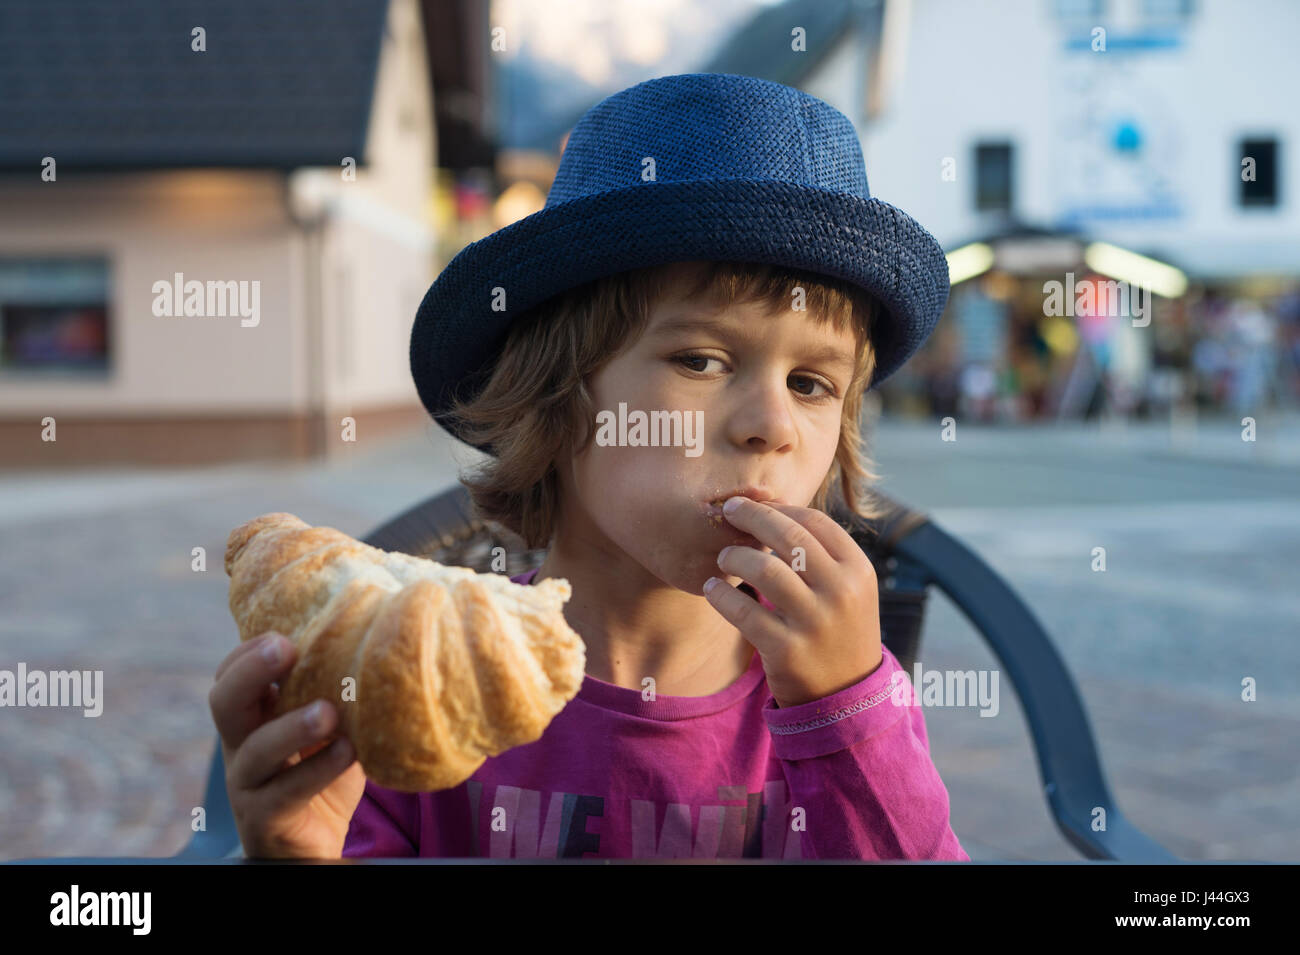 Cute little boy with blue hat sitting at the table stuffing croissant into his mouth. Stock Photo